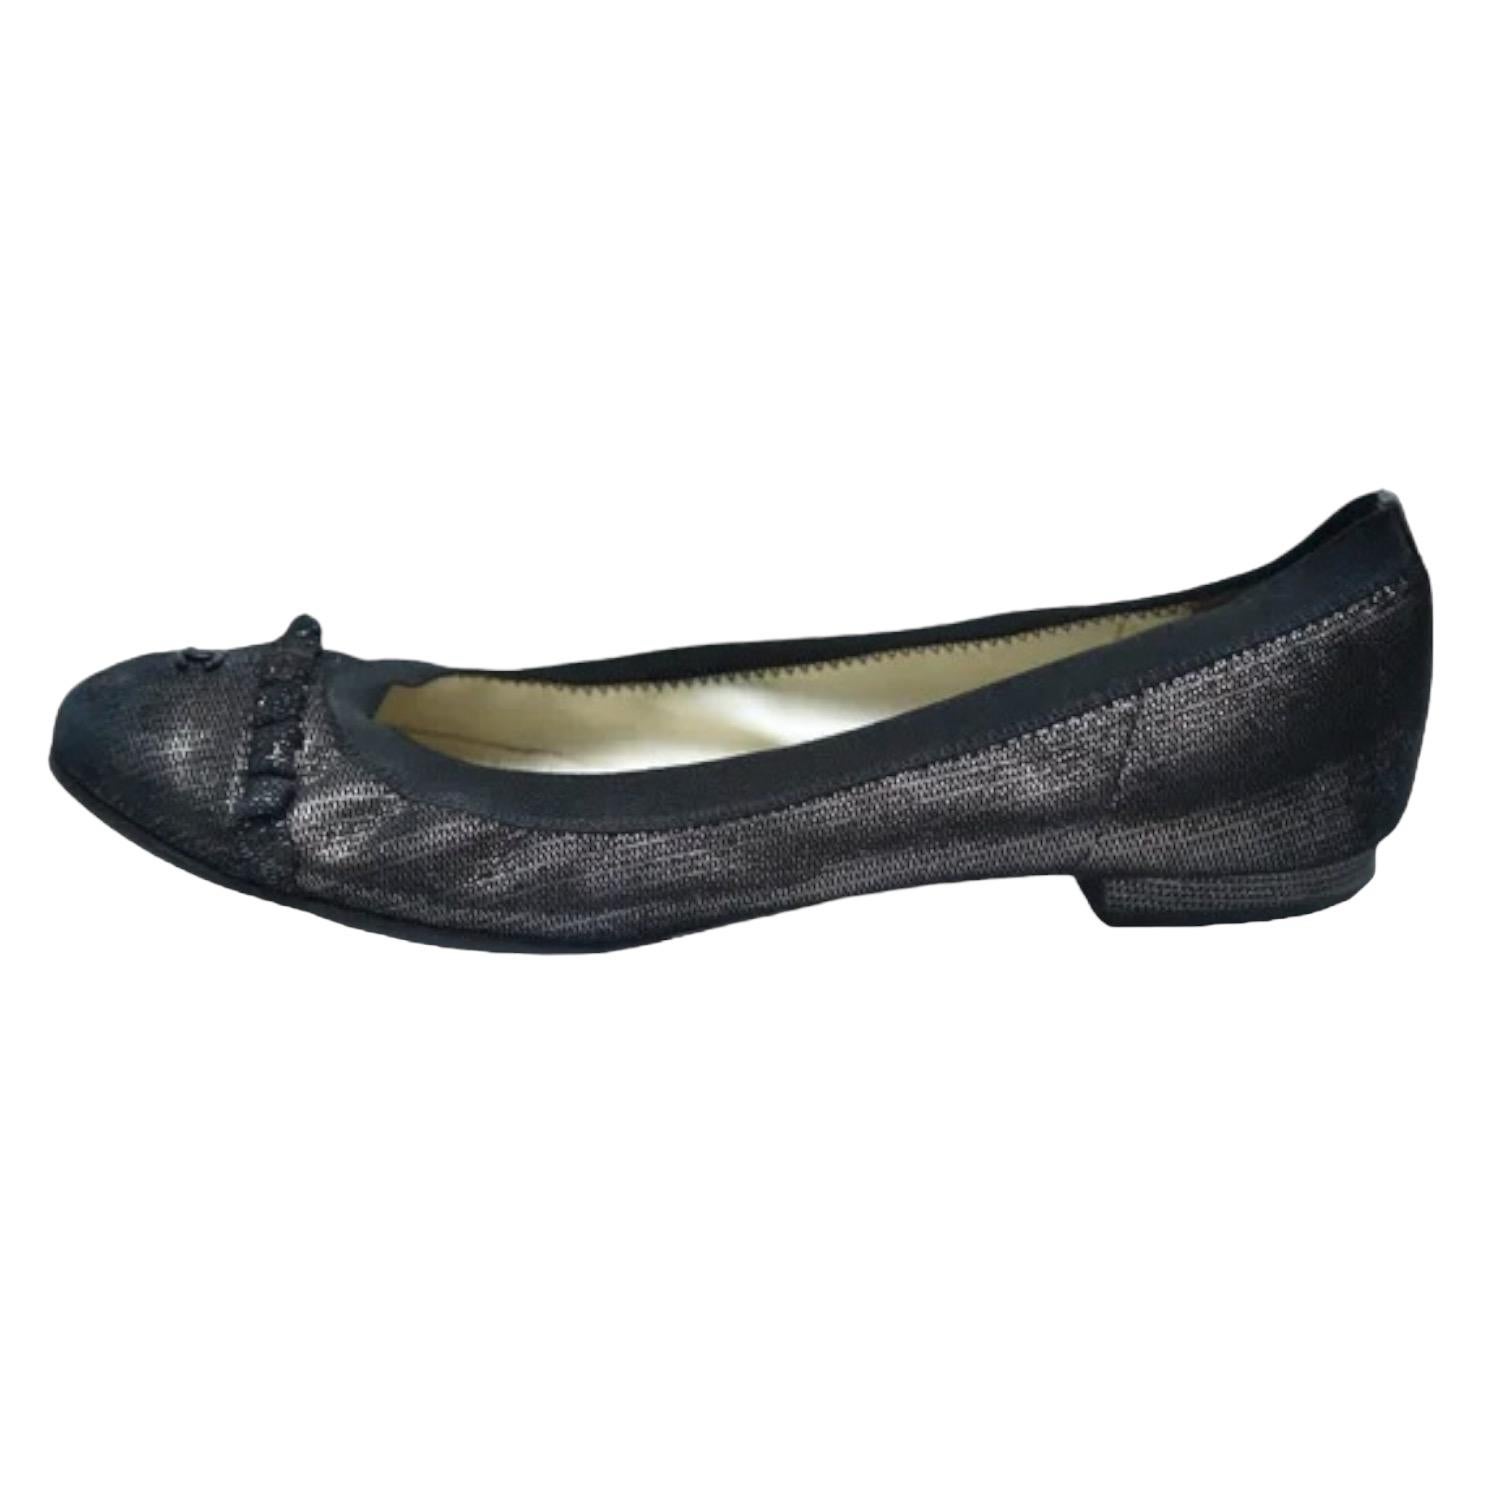 CHANEL METALLIC LEATHER SPIRIT STRETCH BALLET FLATS

Details:
- Metallic black copper leather uppers.
- Interlocking CC logo.
- Ruffle and grosgrain trim.
- Comes with dust bag.

Sz: 39.5

Measurements (Approx):
- Insole 10